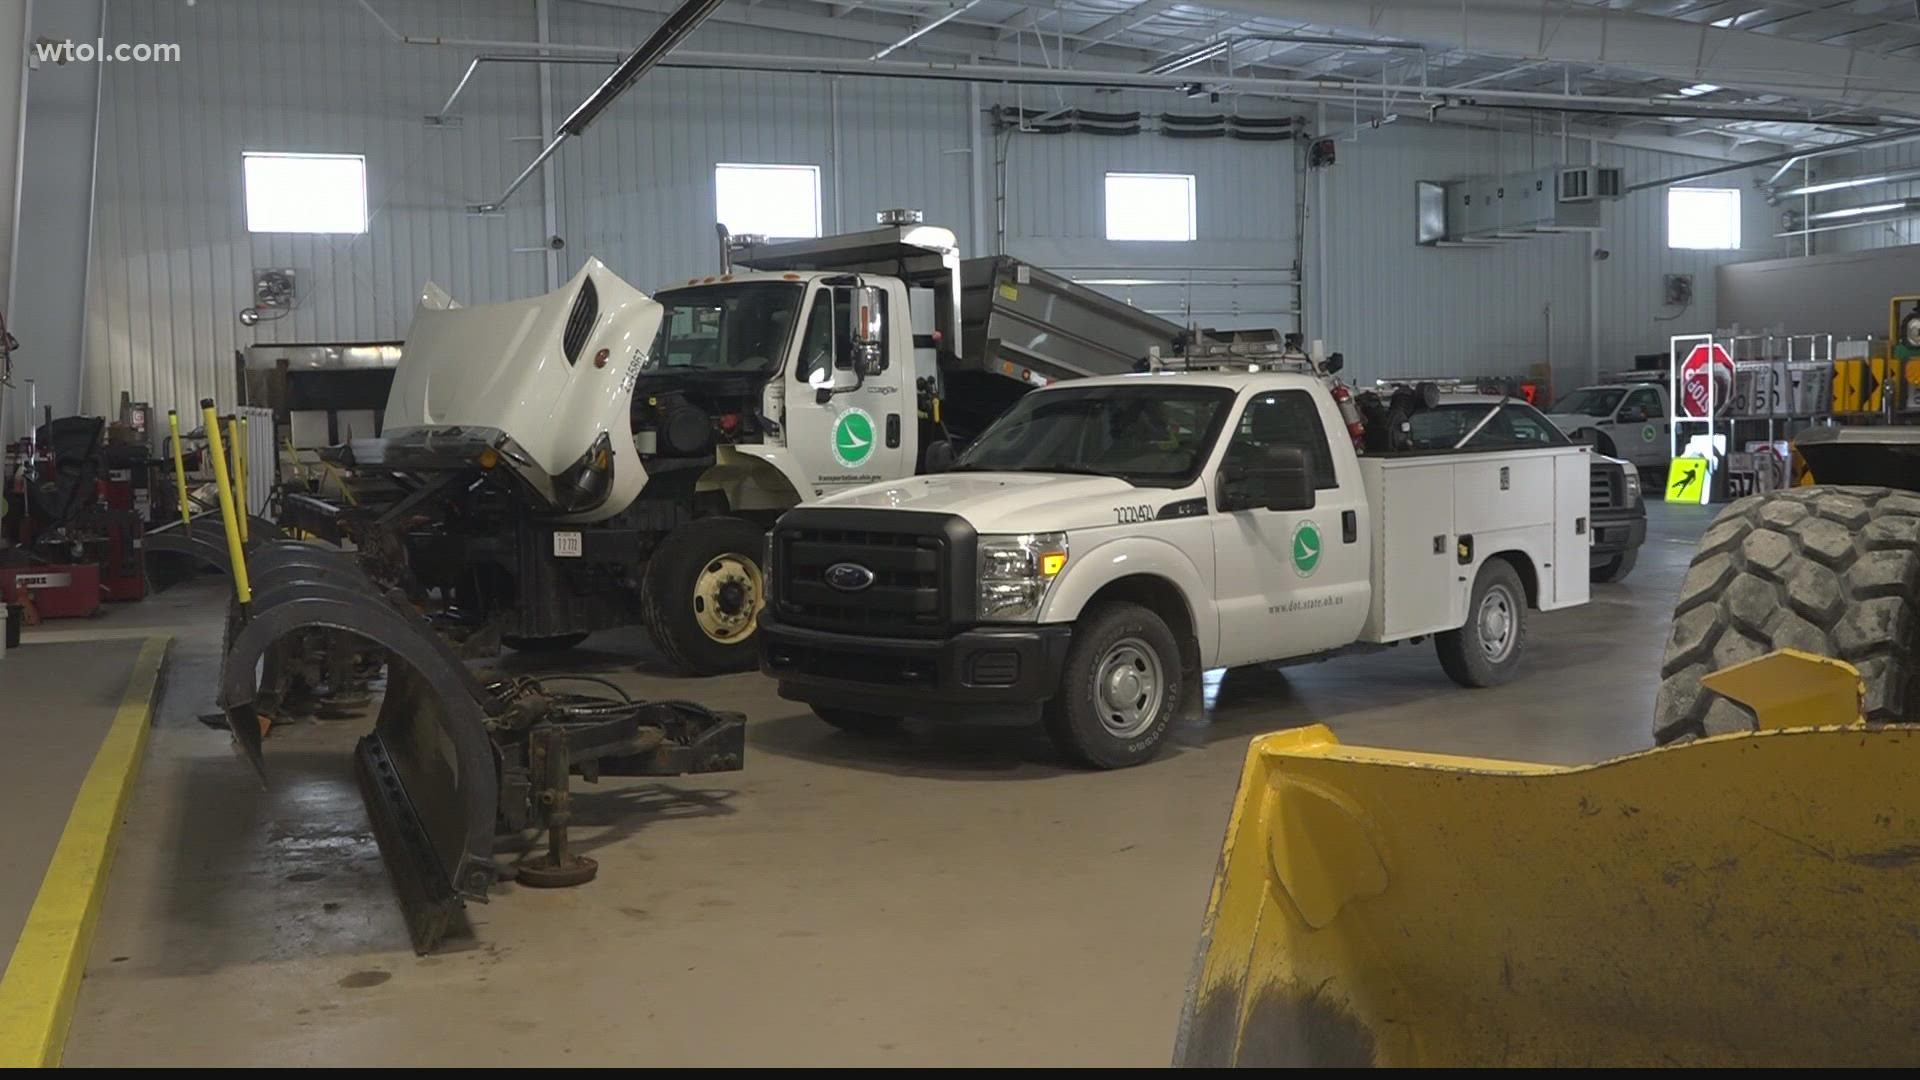 The Sandusky County ODOT garage will have their 20 drivers working 12 hour shifts once the snow begins to fall